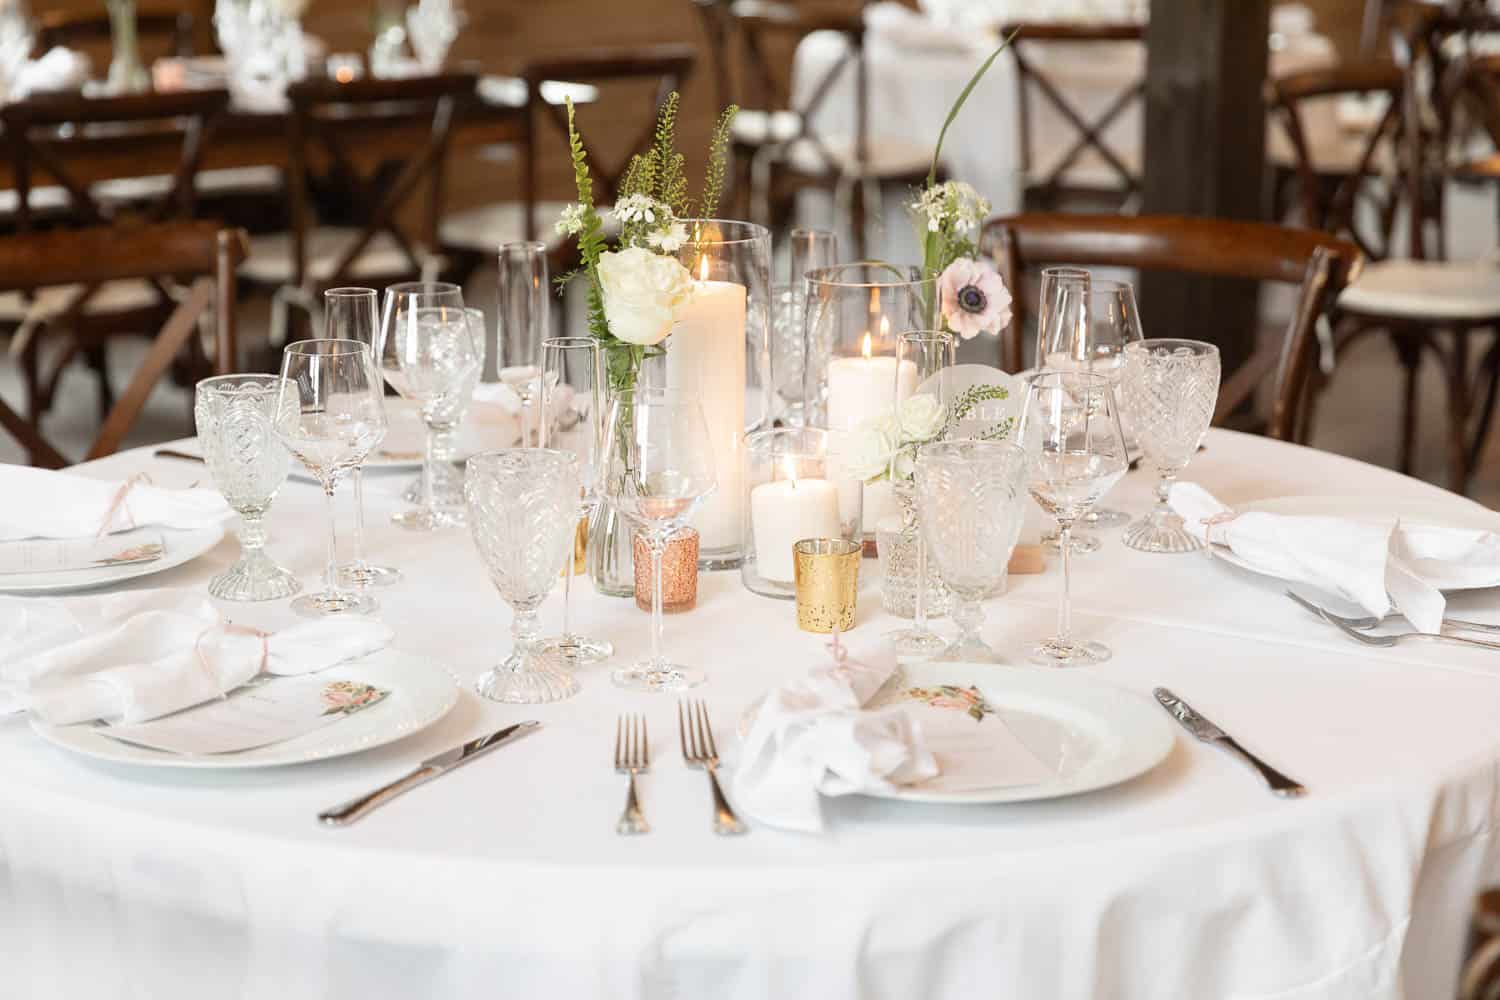 Elegant wedding table setting with crystal glassware, floral centerpieces, candles, and white linens in a well-lit venue.